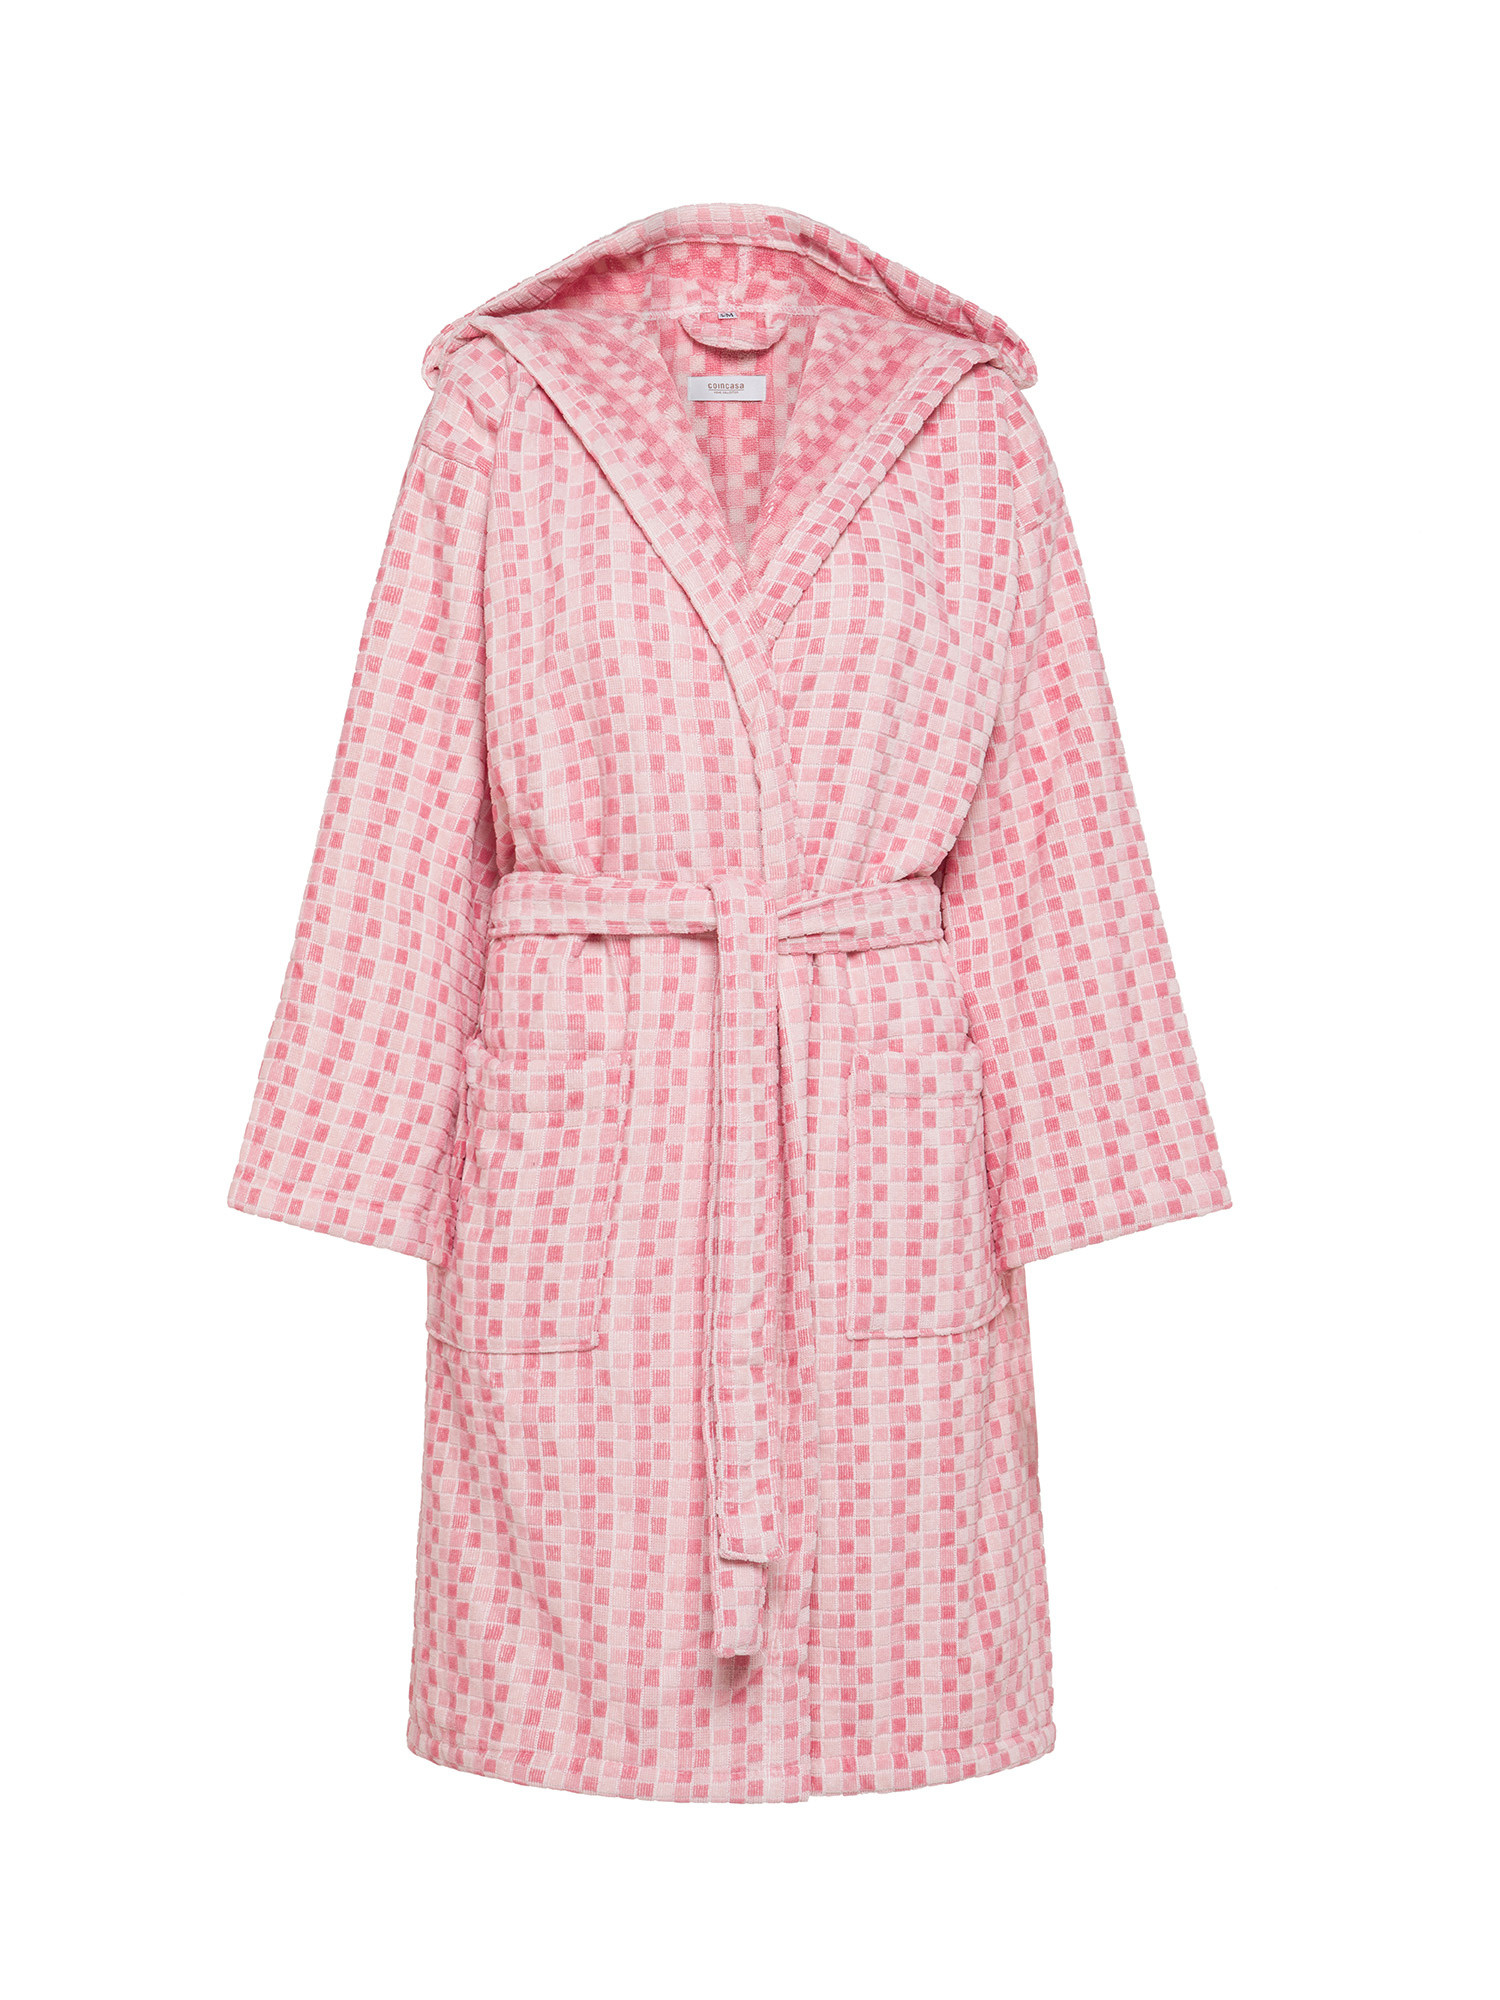 Yarn-dyed pure cotton velour bathrobe with mosaic effect check pattern, Pink, large image number 0